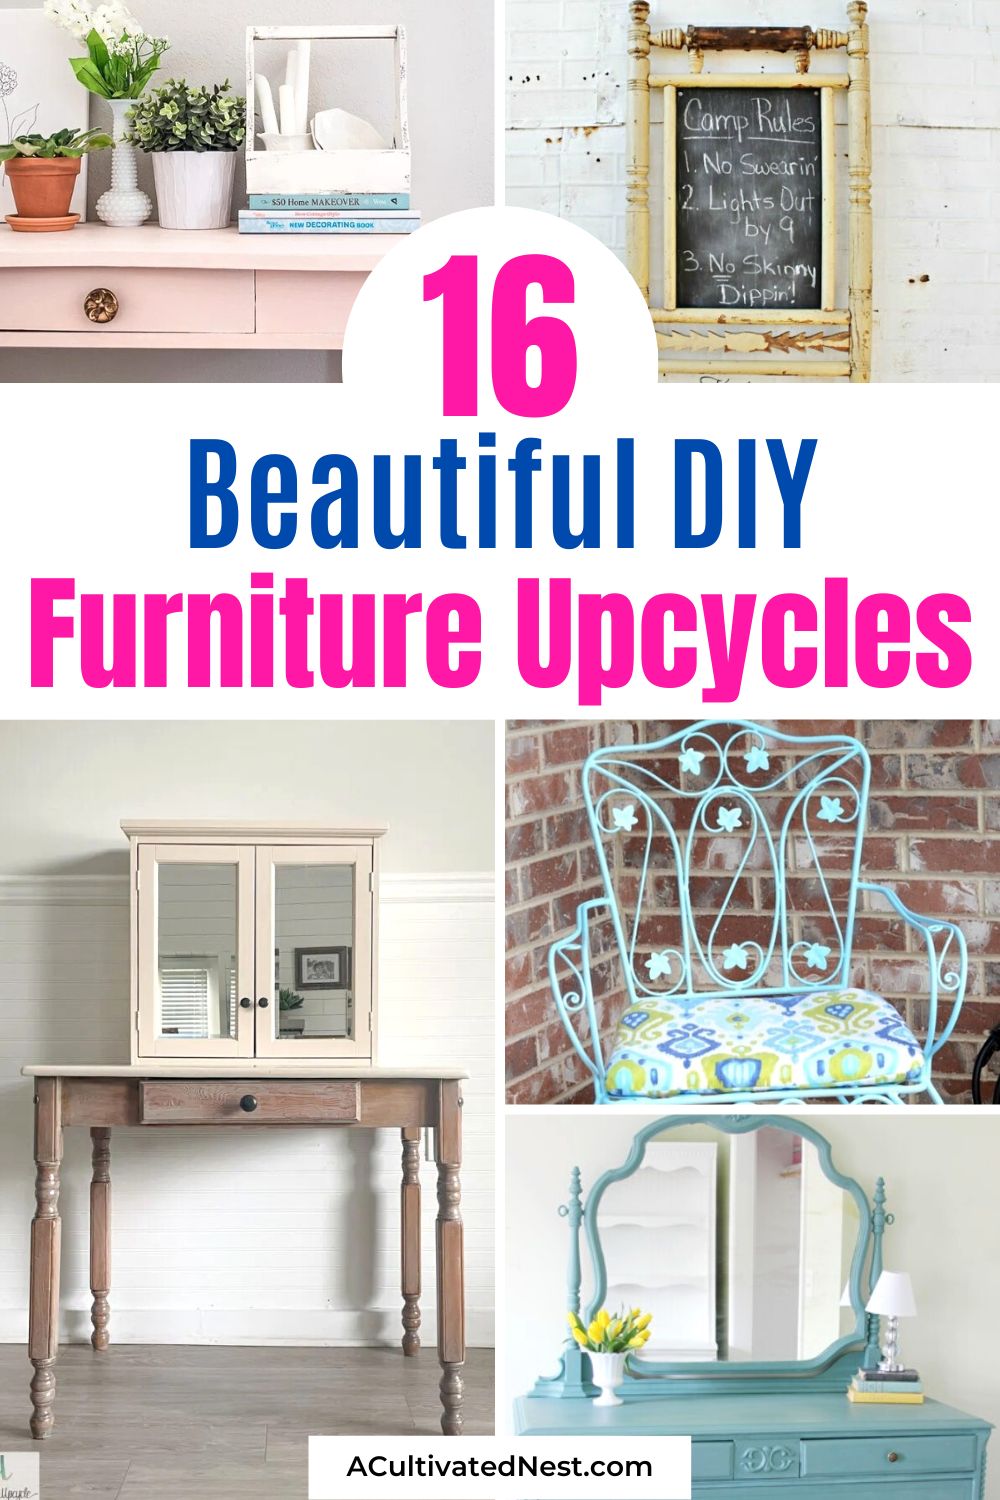 16 Creative Ways to Upcycle Old Furniture- Don't toss out that old furniture just yet! Discover genius ways to repurpose and upcycle old furniture into stunning home décor treasures. Whether it's a vintage chair or a worn-out table, learn how to transform them into something beautiful and unique. | #Repurpose #upcycling #FurnitureMakeover #diyProject #ACultivatedNest